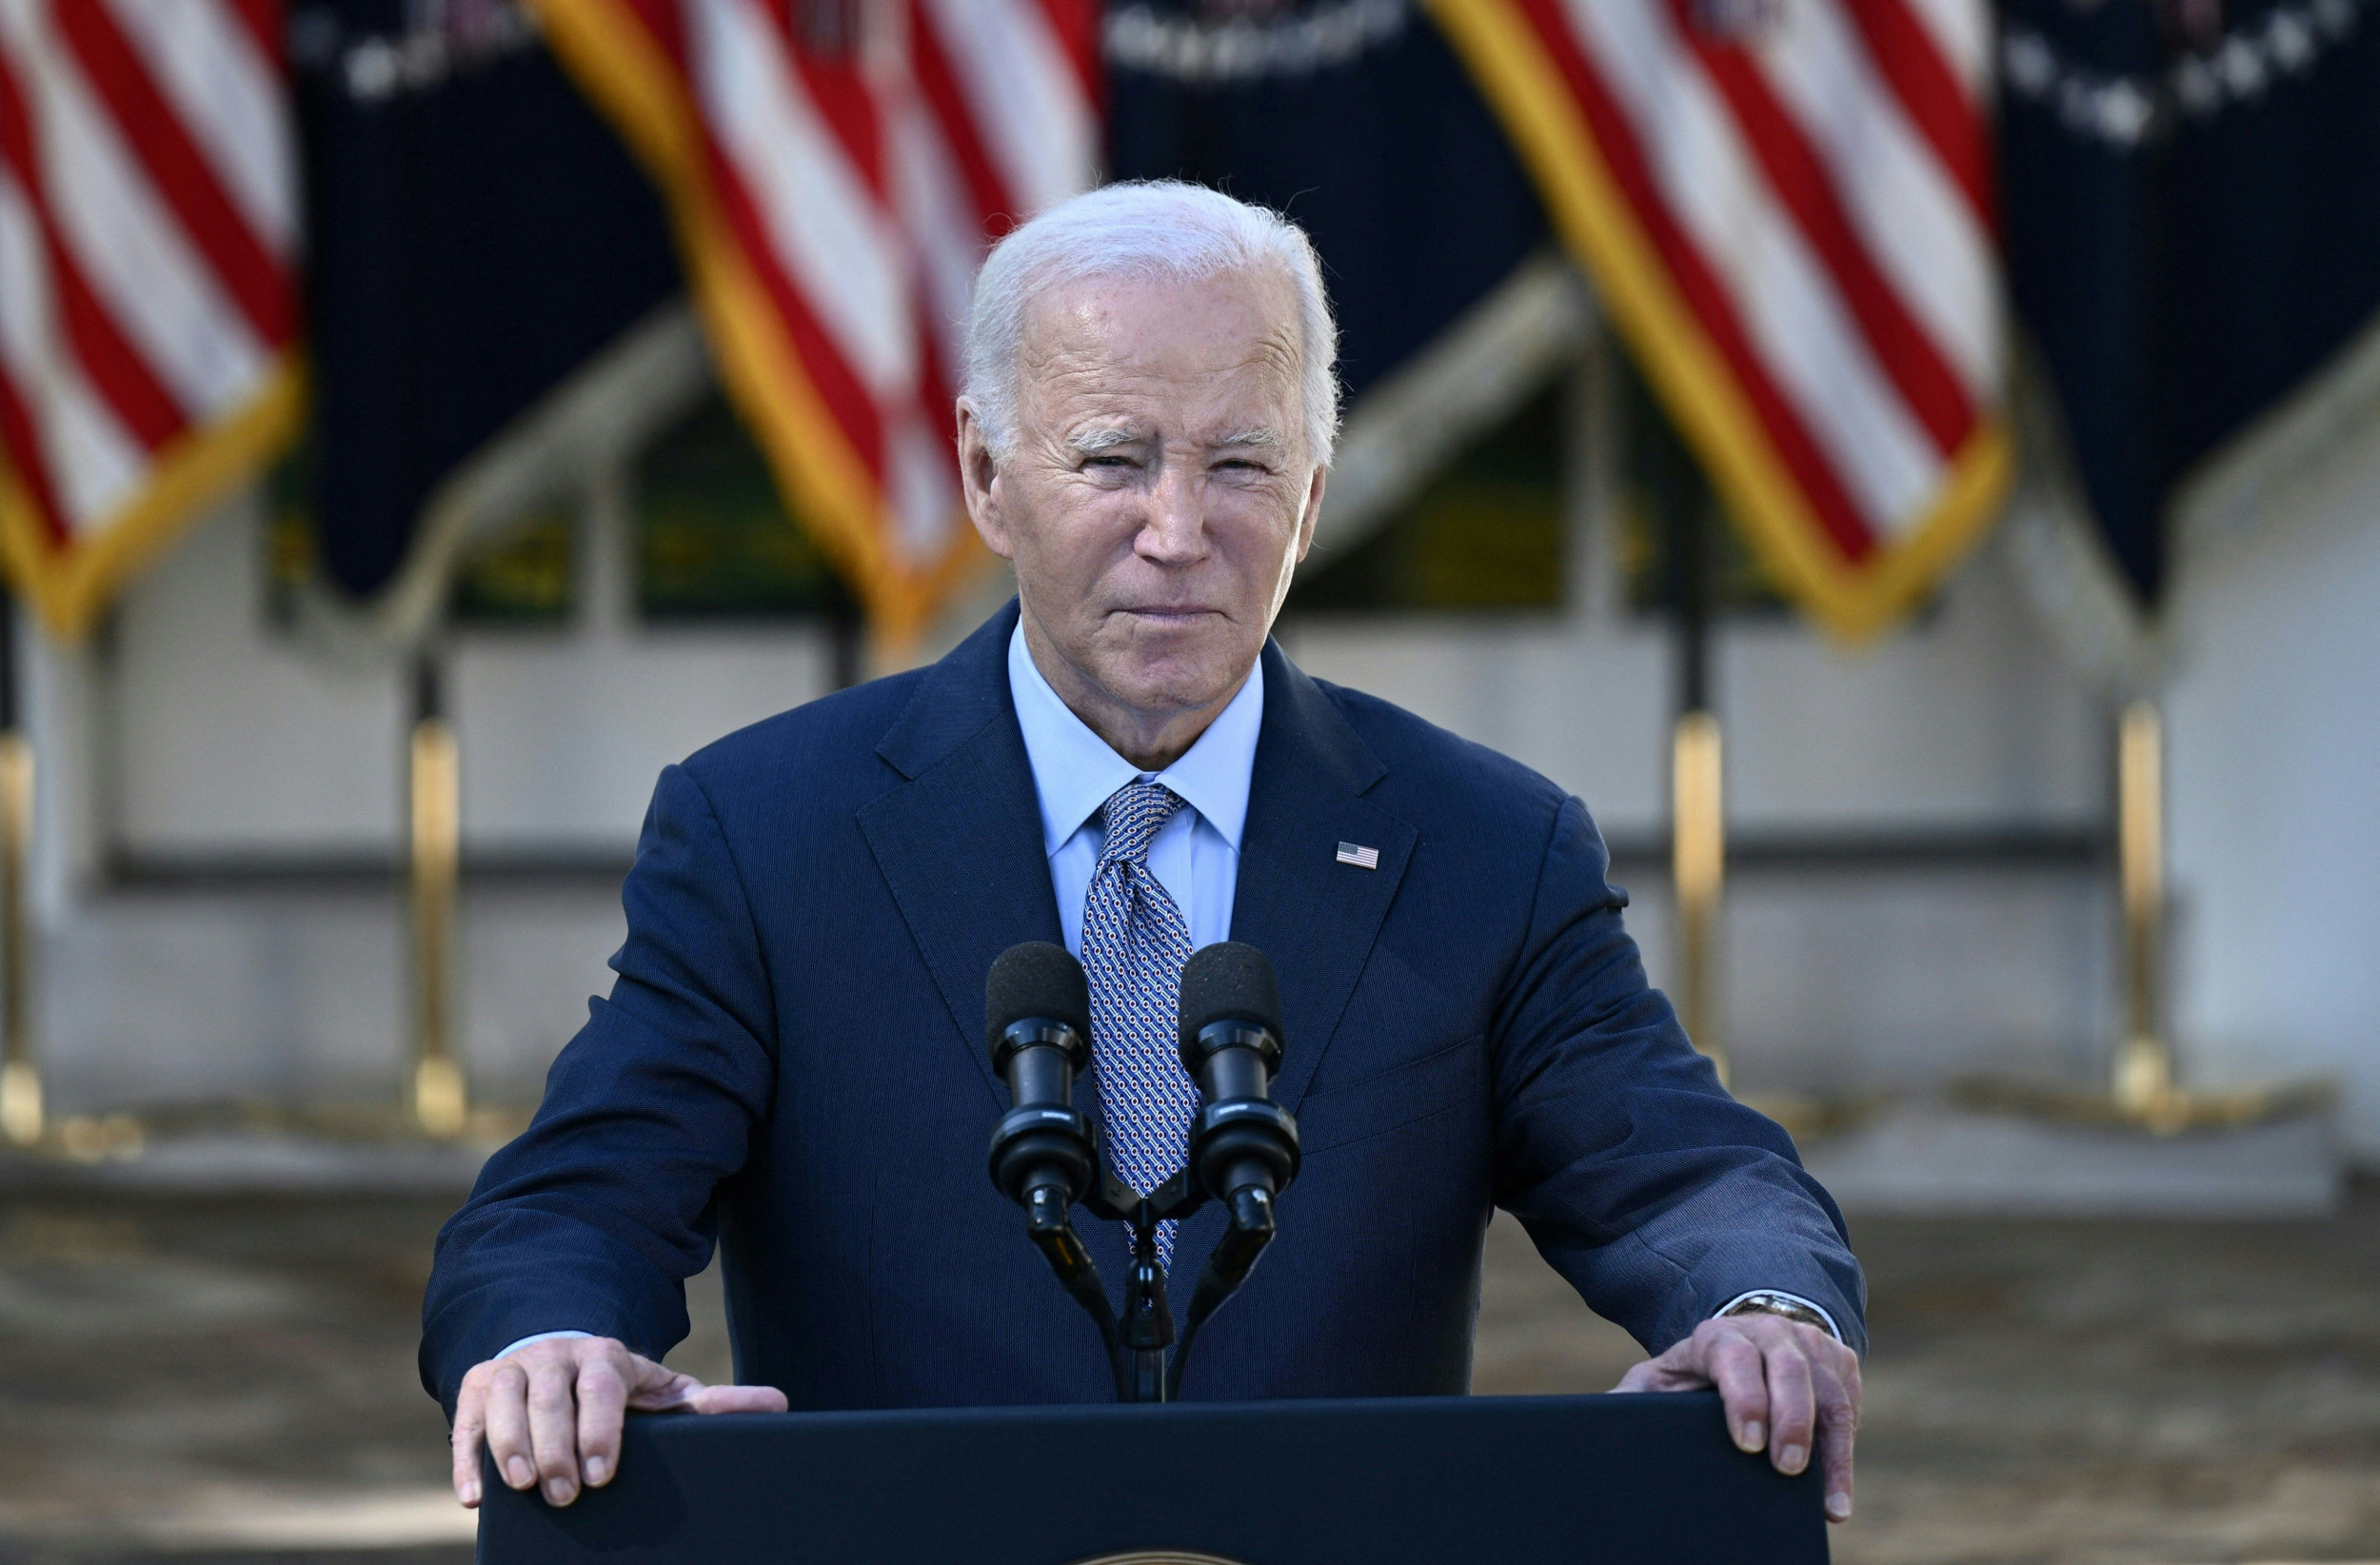 Joe Biden Missing From Primary Ballot Sparks Unusual Plea to Supporters